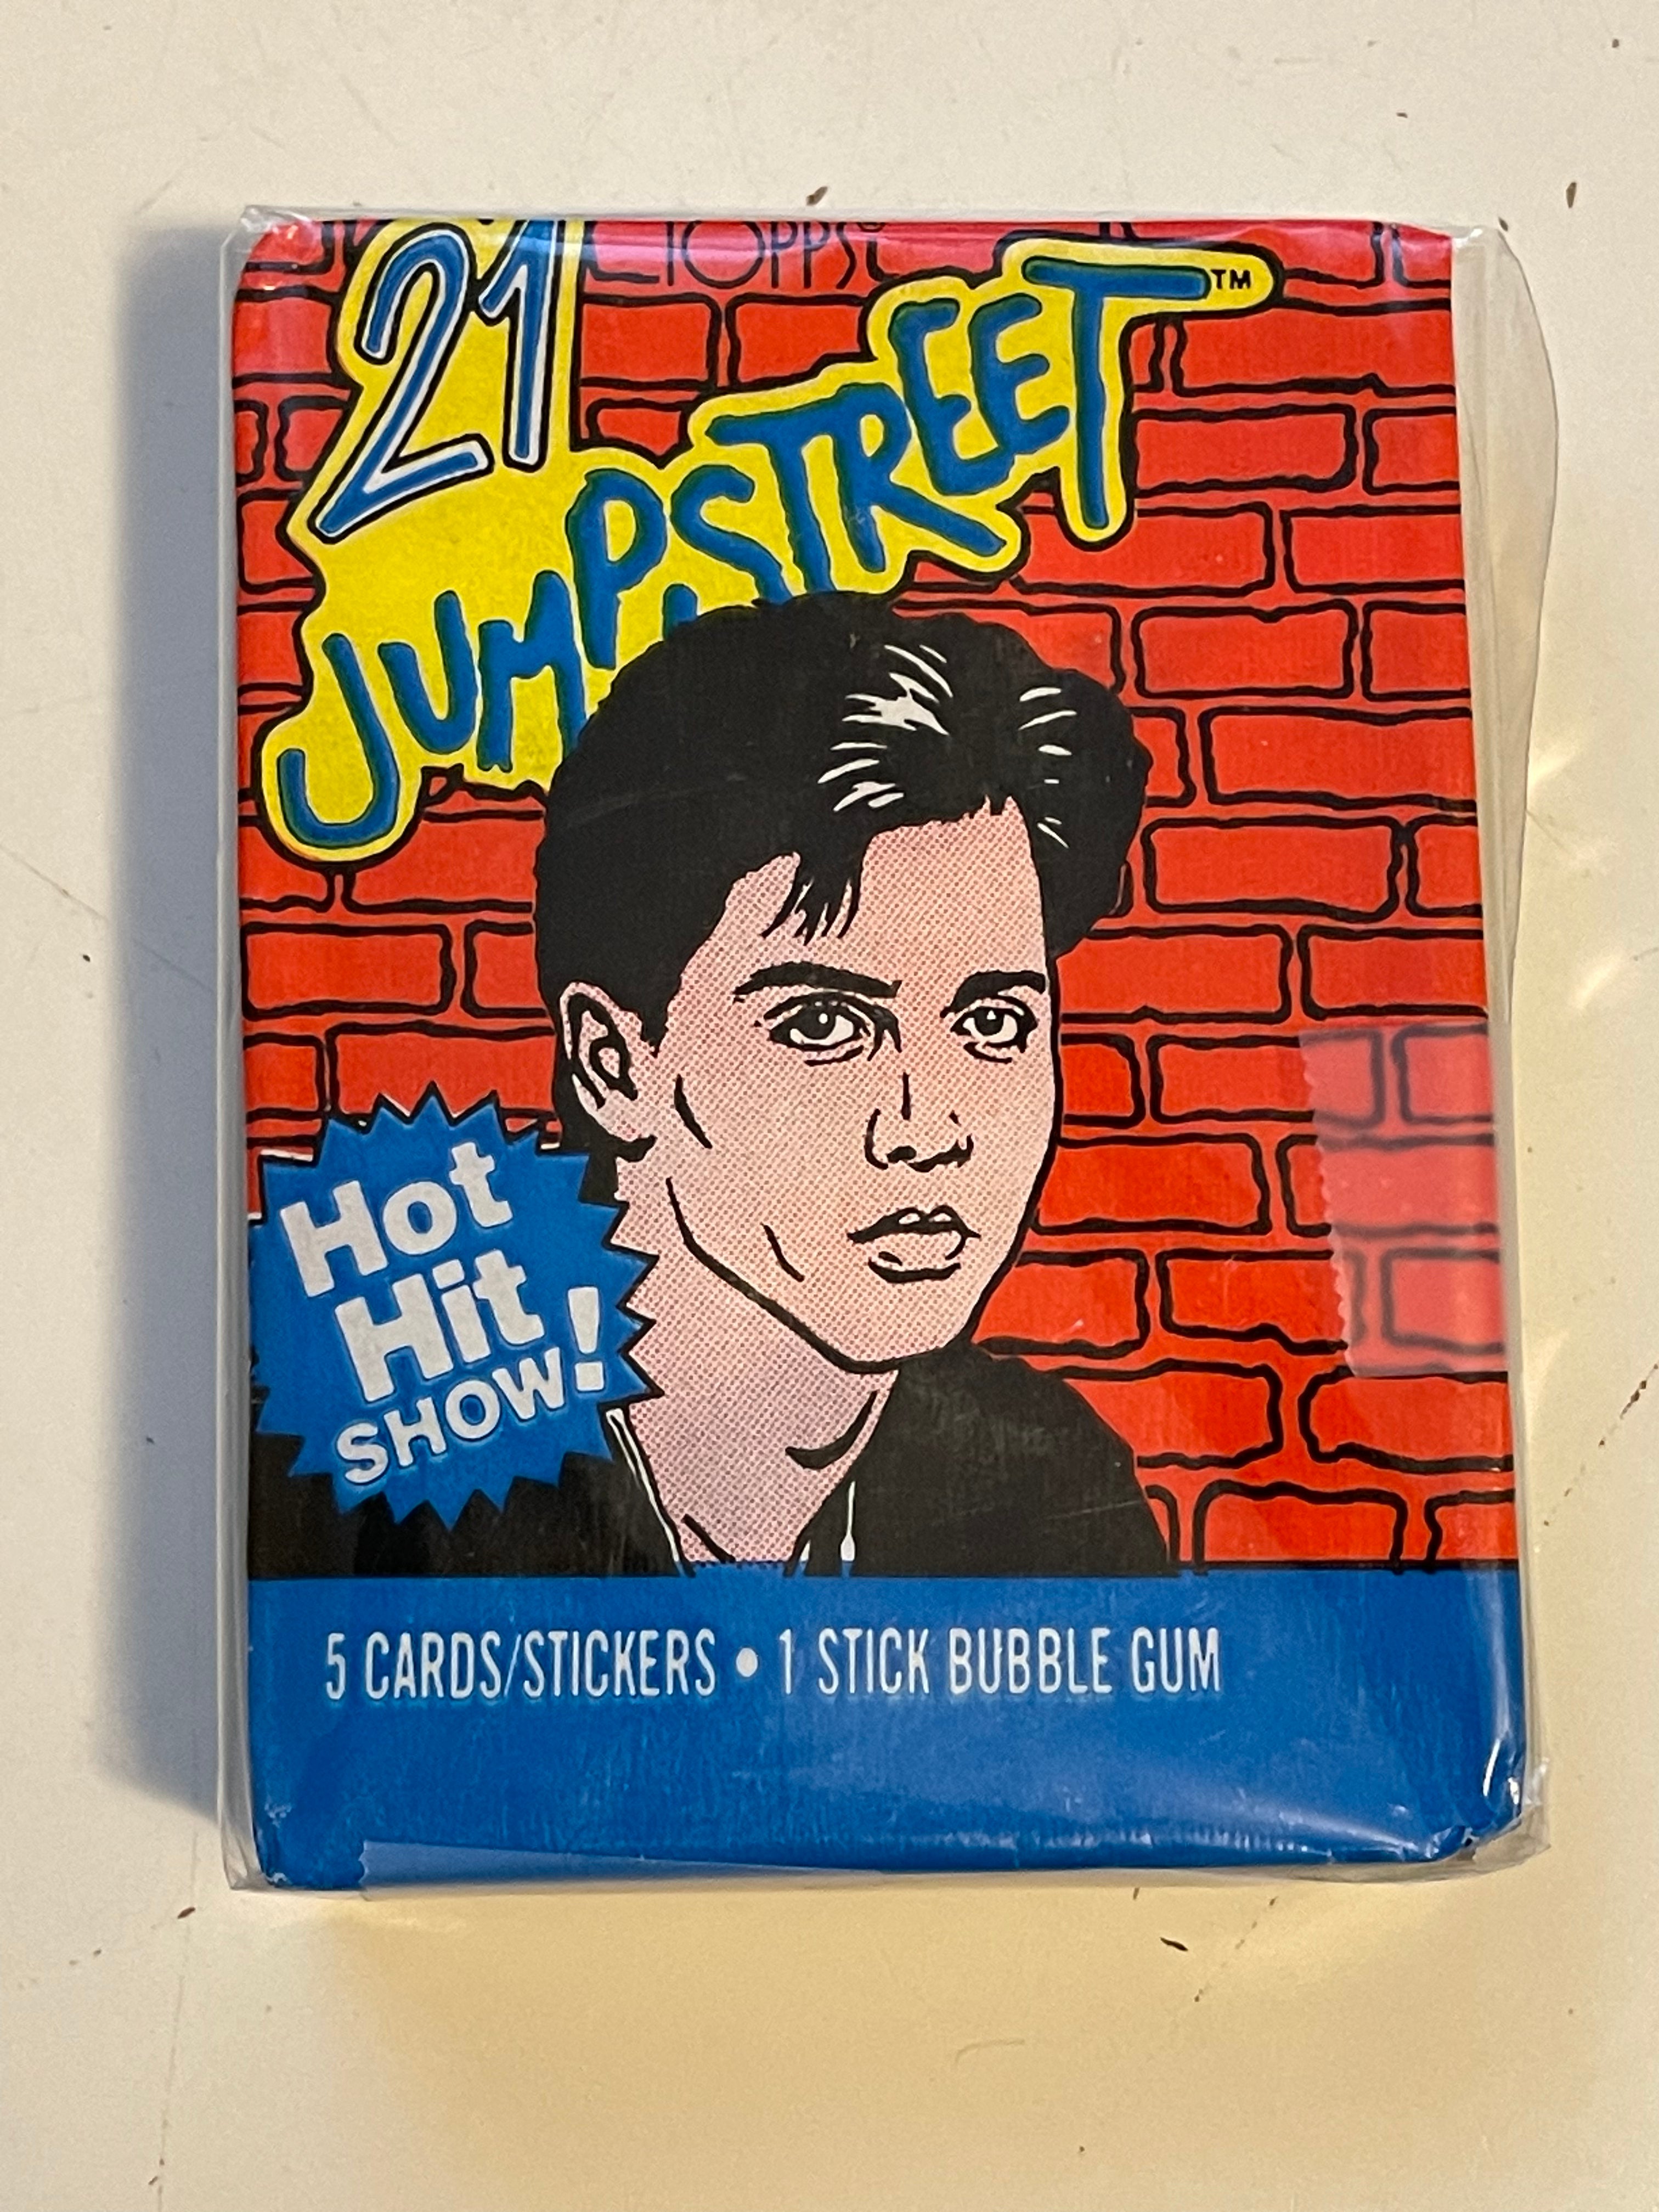 21 Jump st. Trading cards set with wrapper 1987